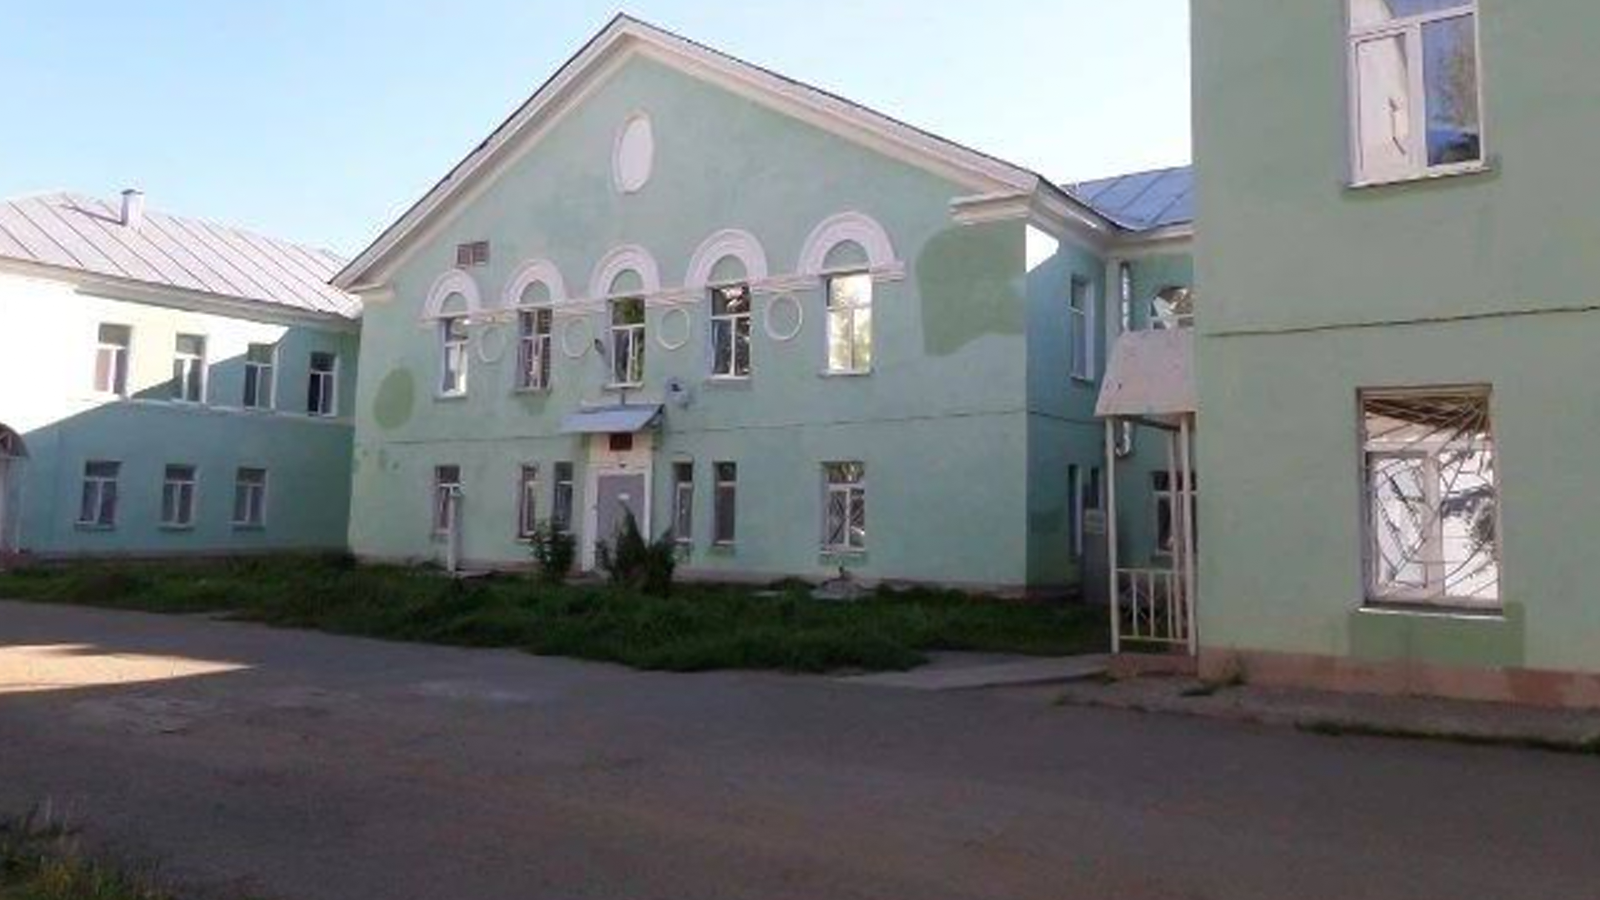 In Izhkar, they want to close another maternity hospital due to the fact that they “do not give birth”